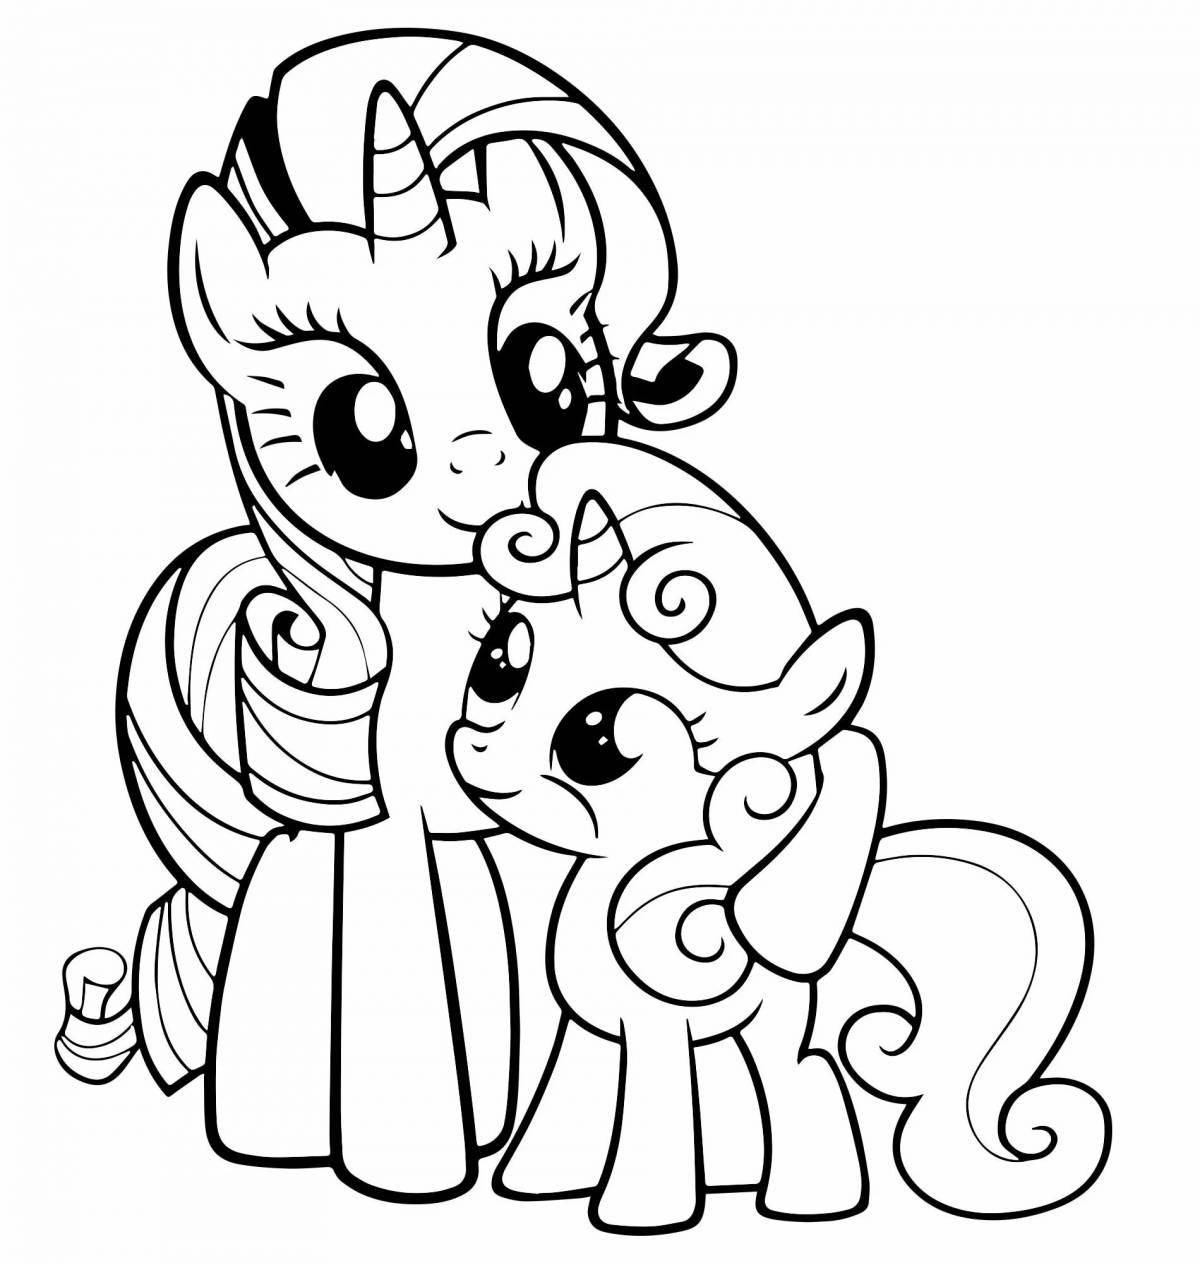 Coloring pages for kids with colorful little ponies